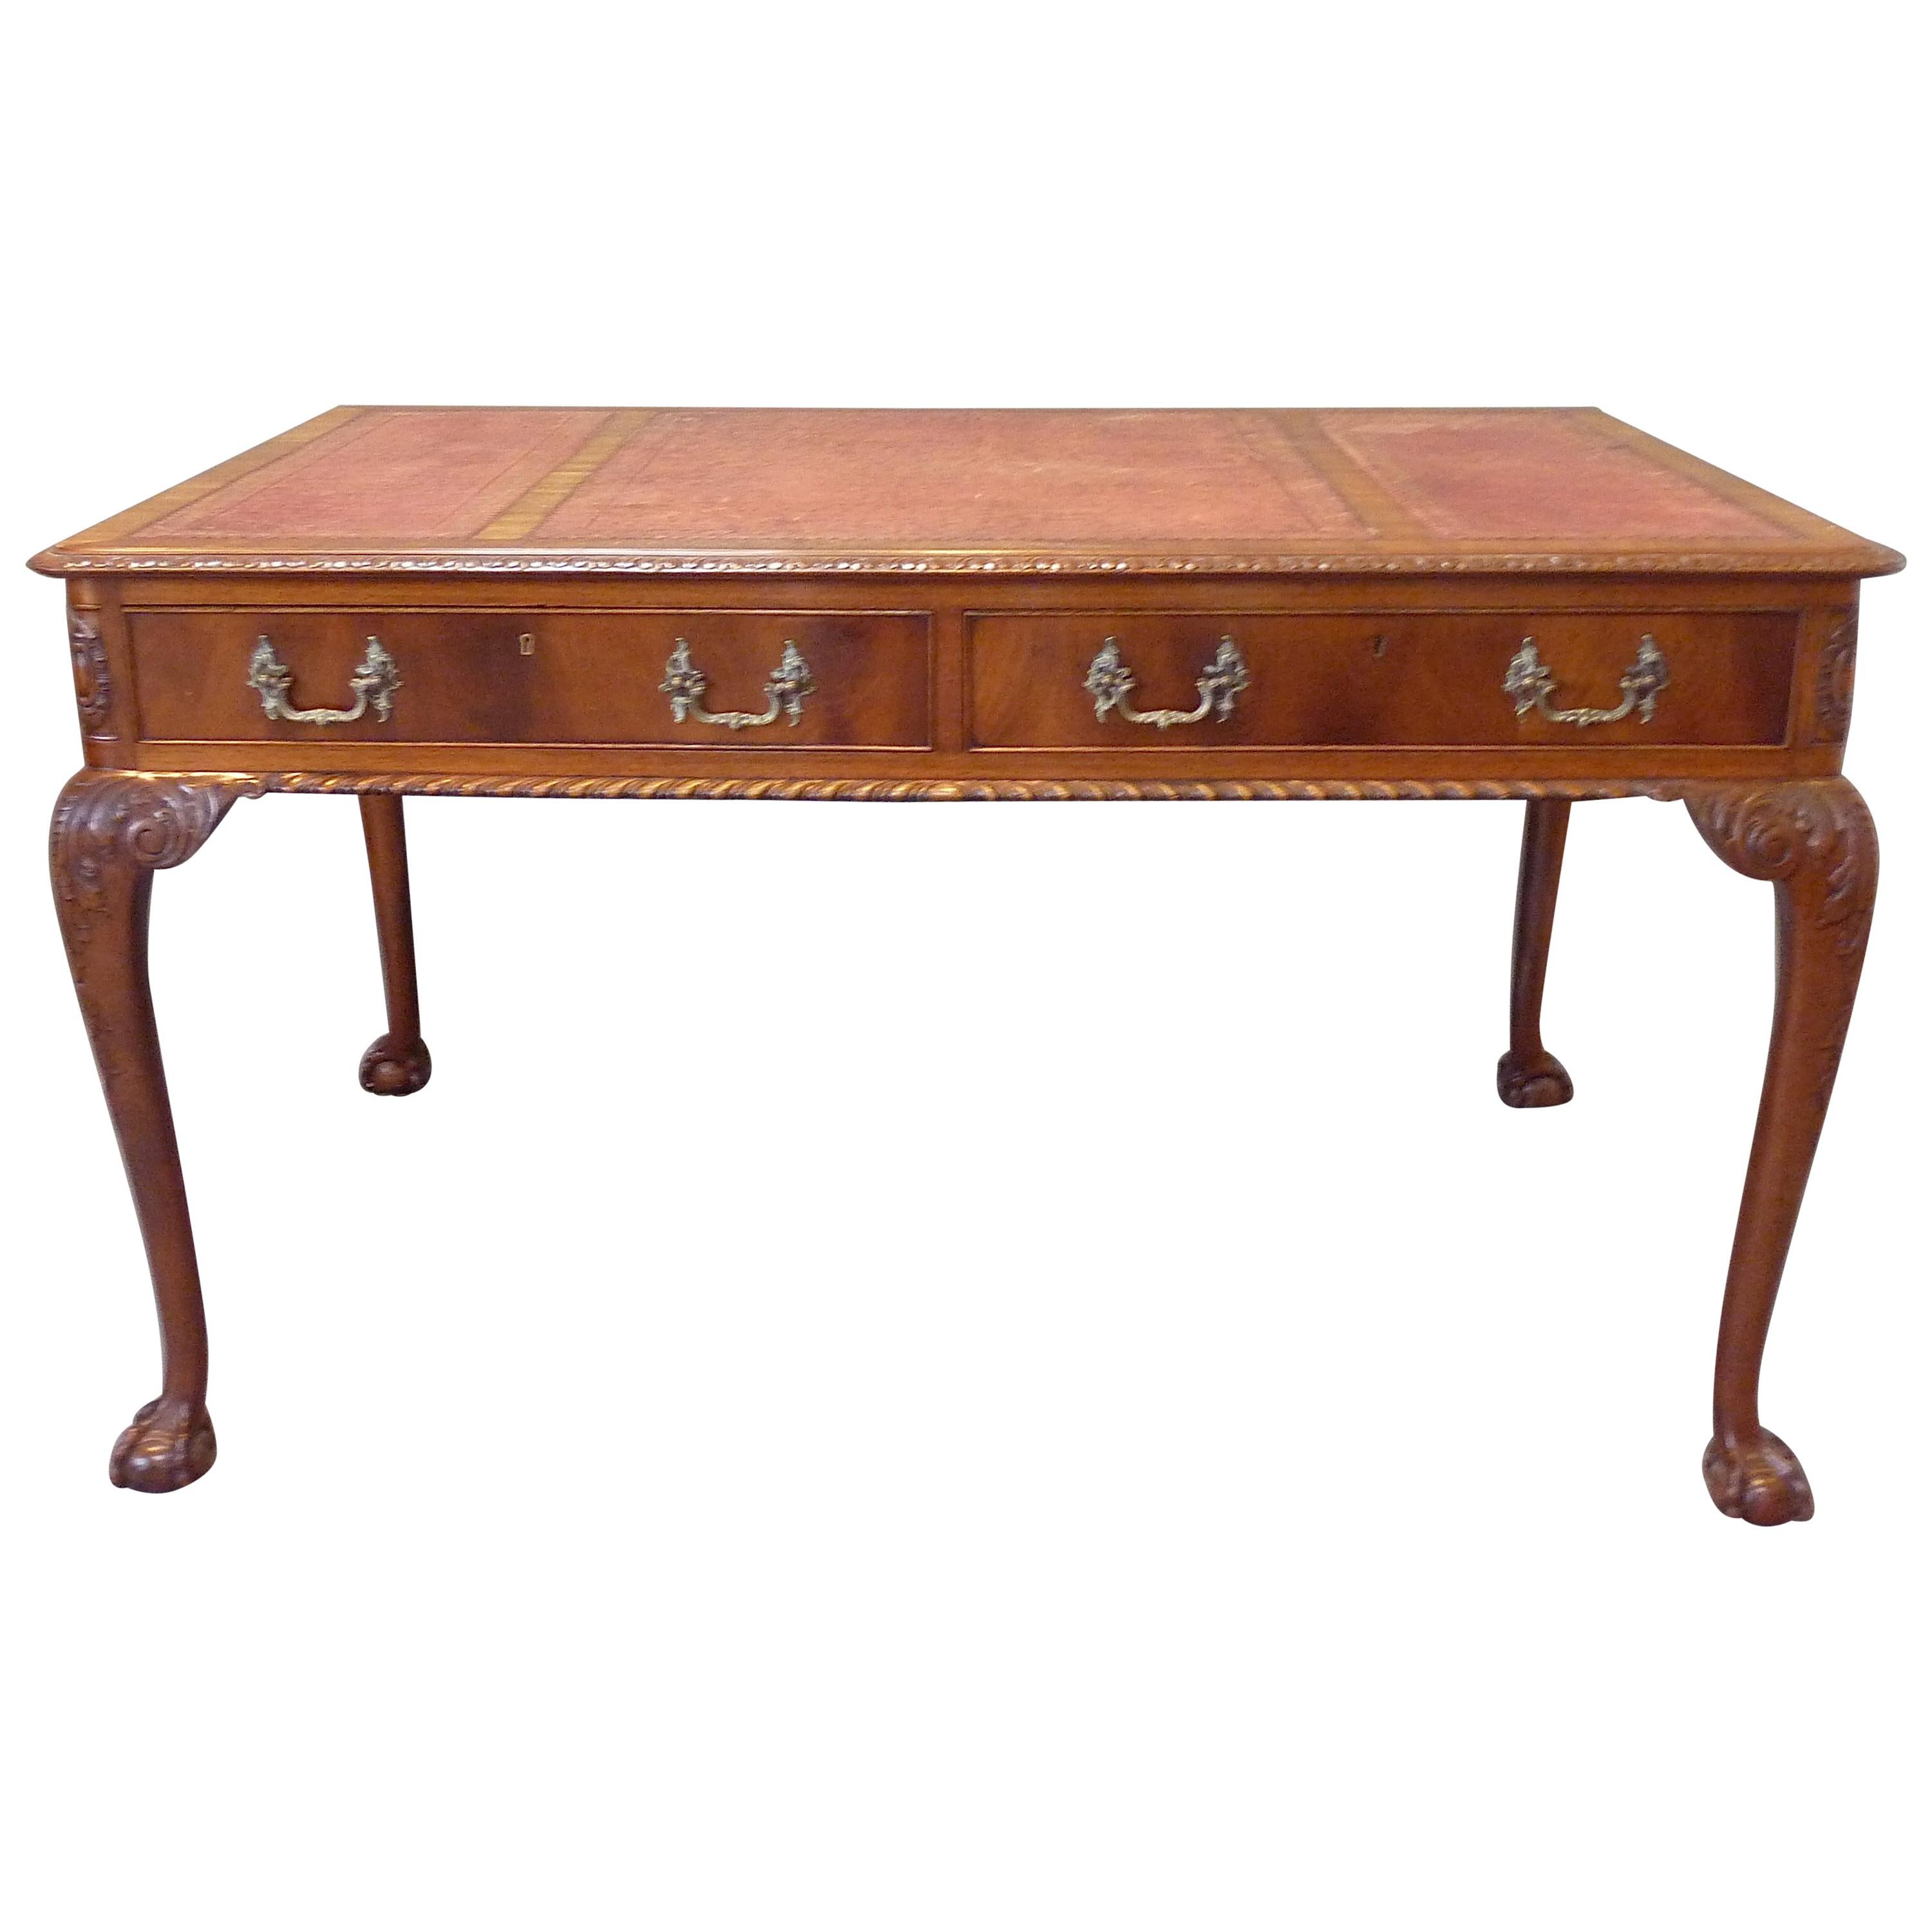 “Chippendale” Style English Writing Table